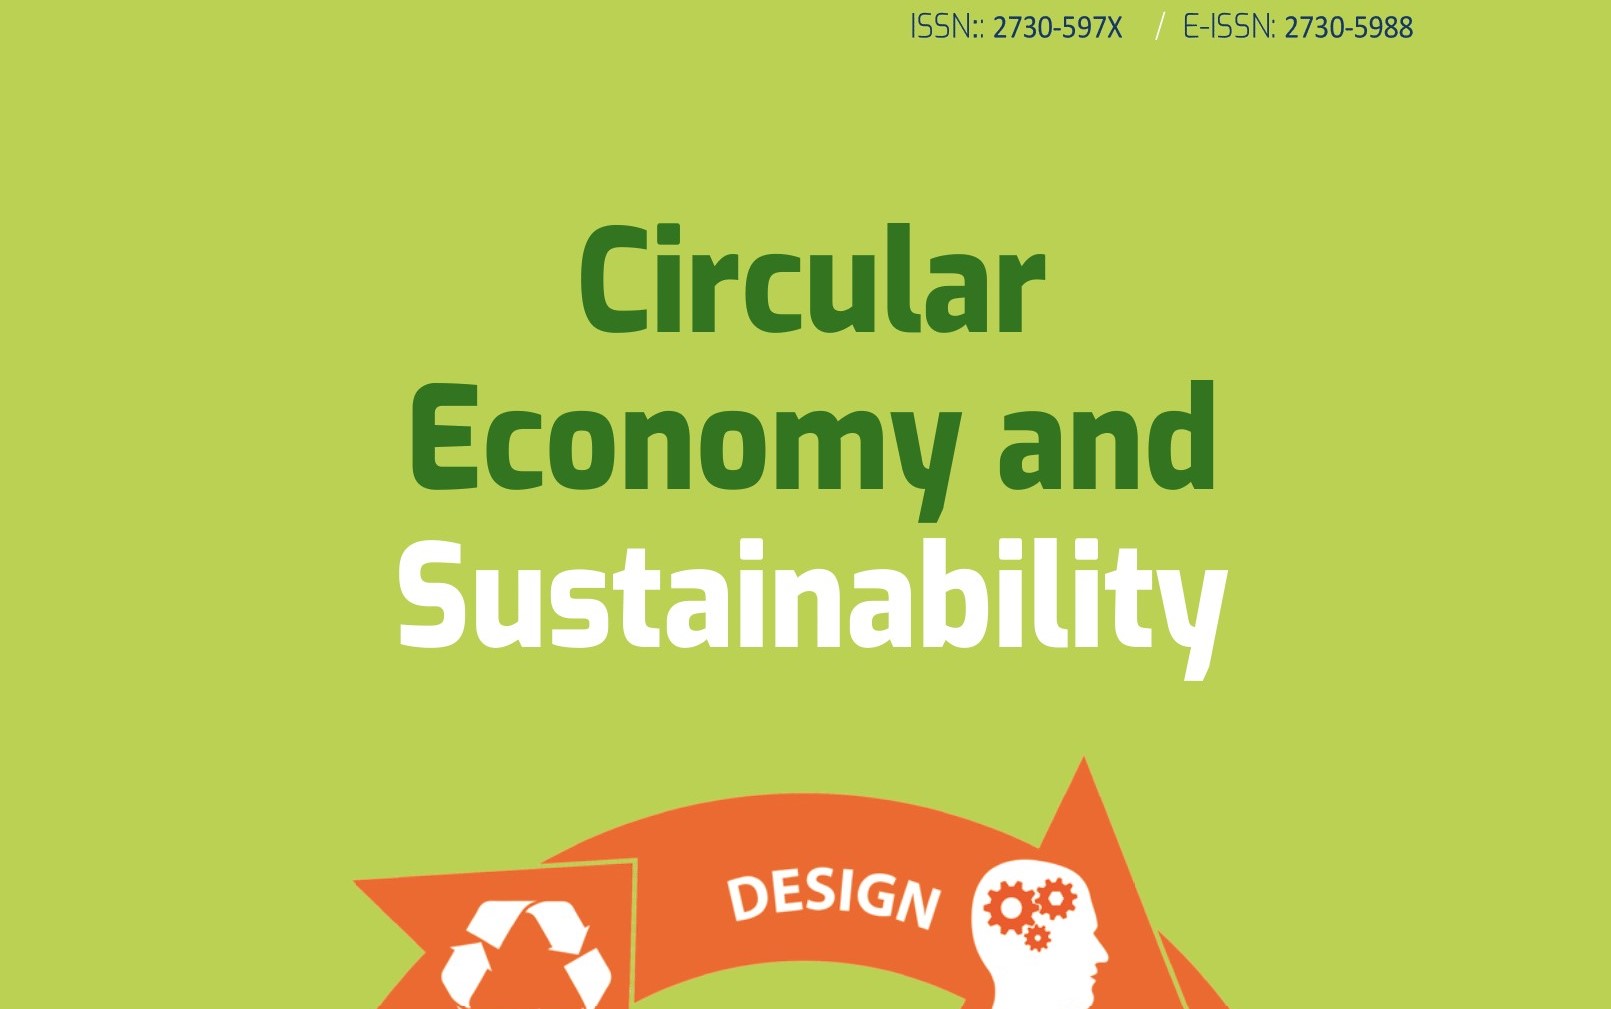 Conference Special Issue in Circular Economy and Sustainability journal (Springer)